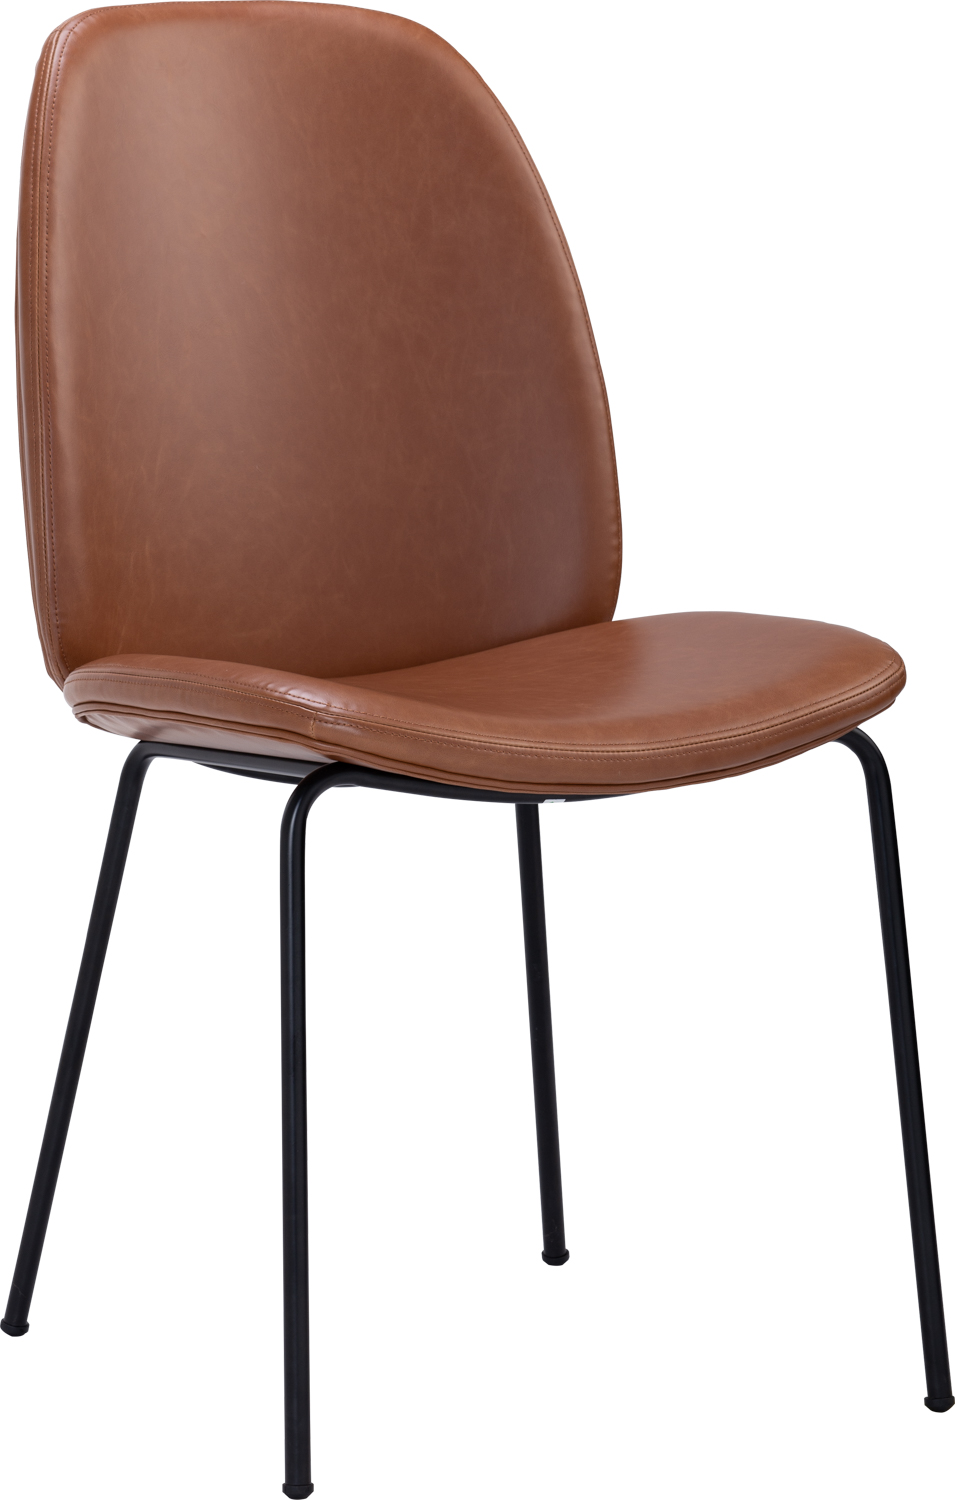 ADELE DINING CHAIR 802/547